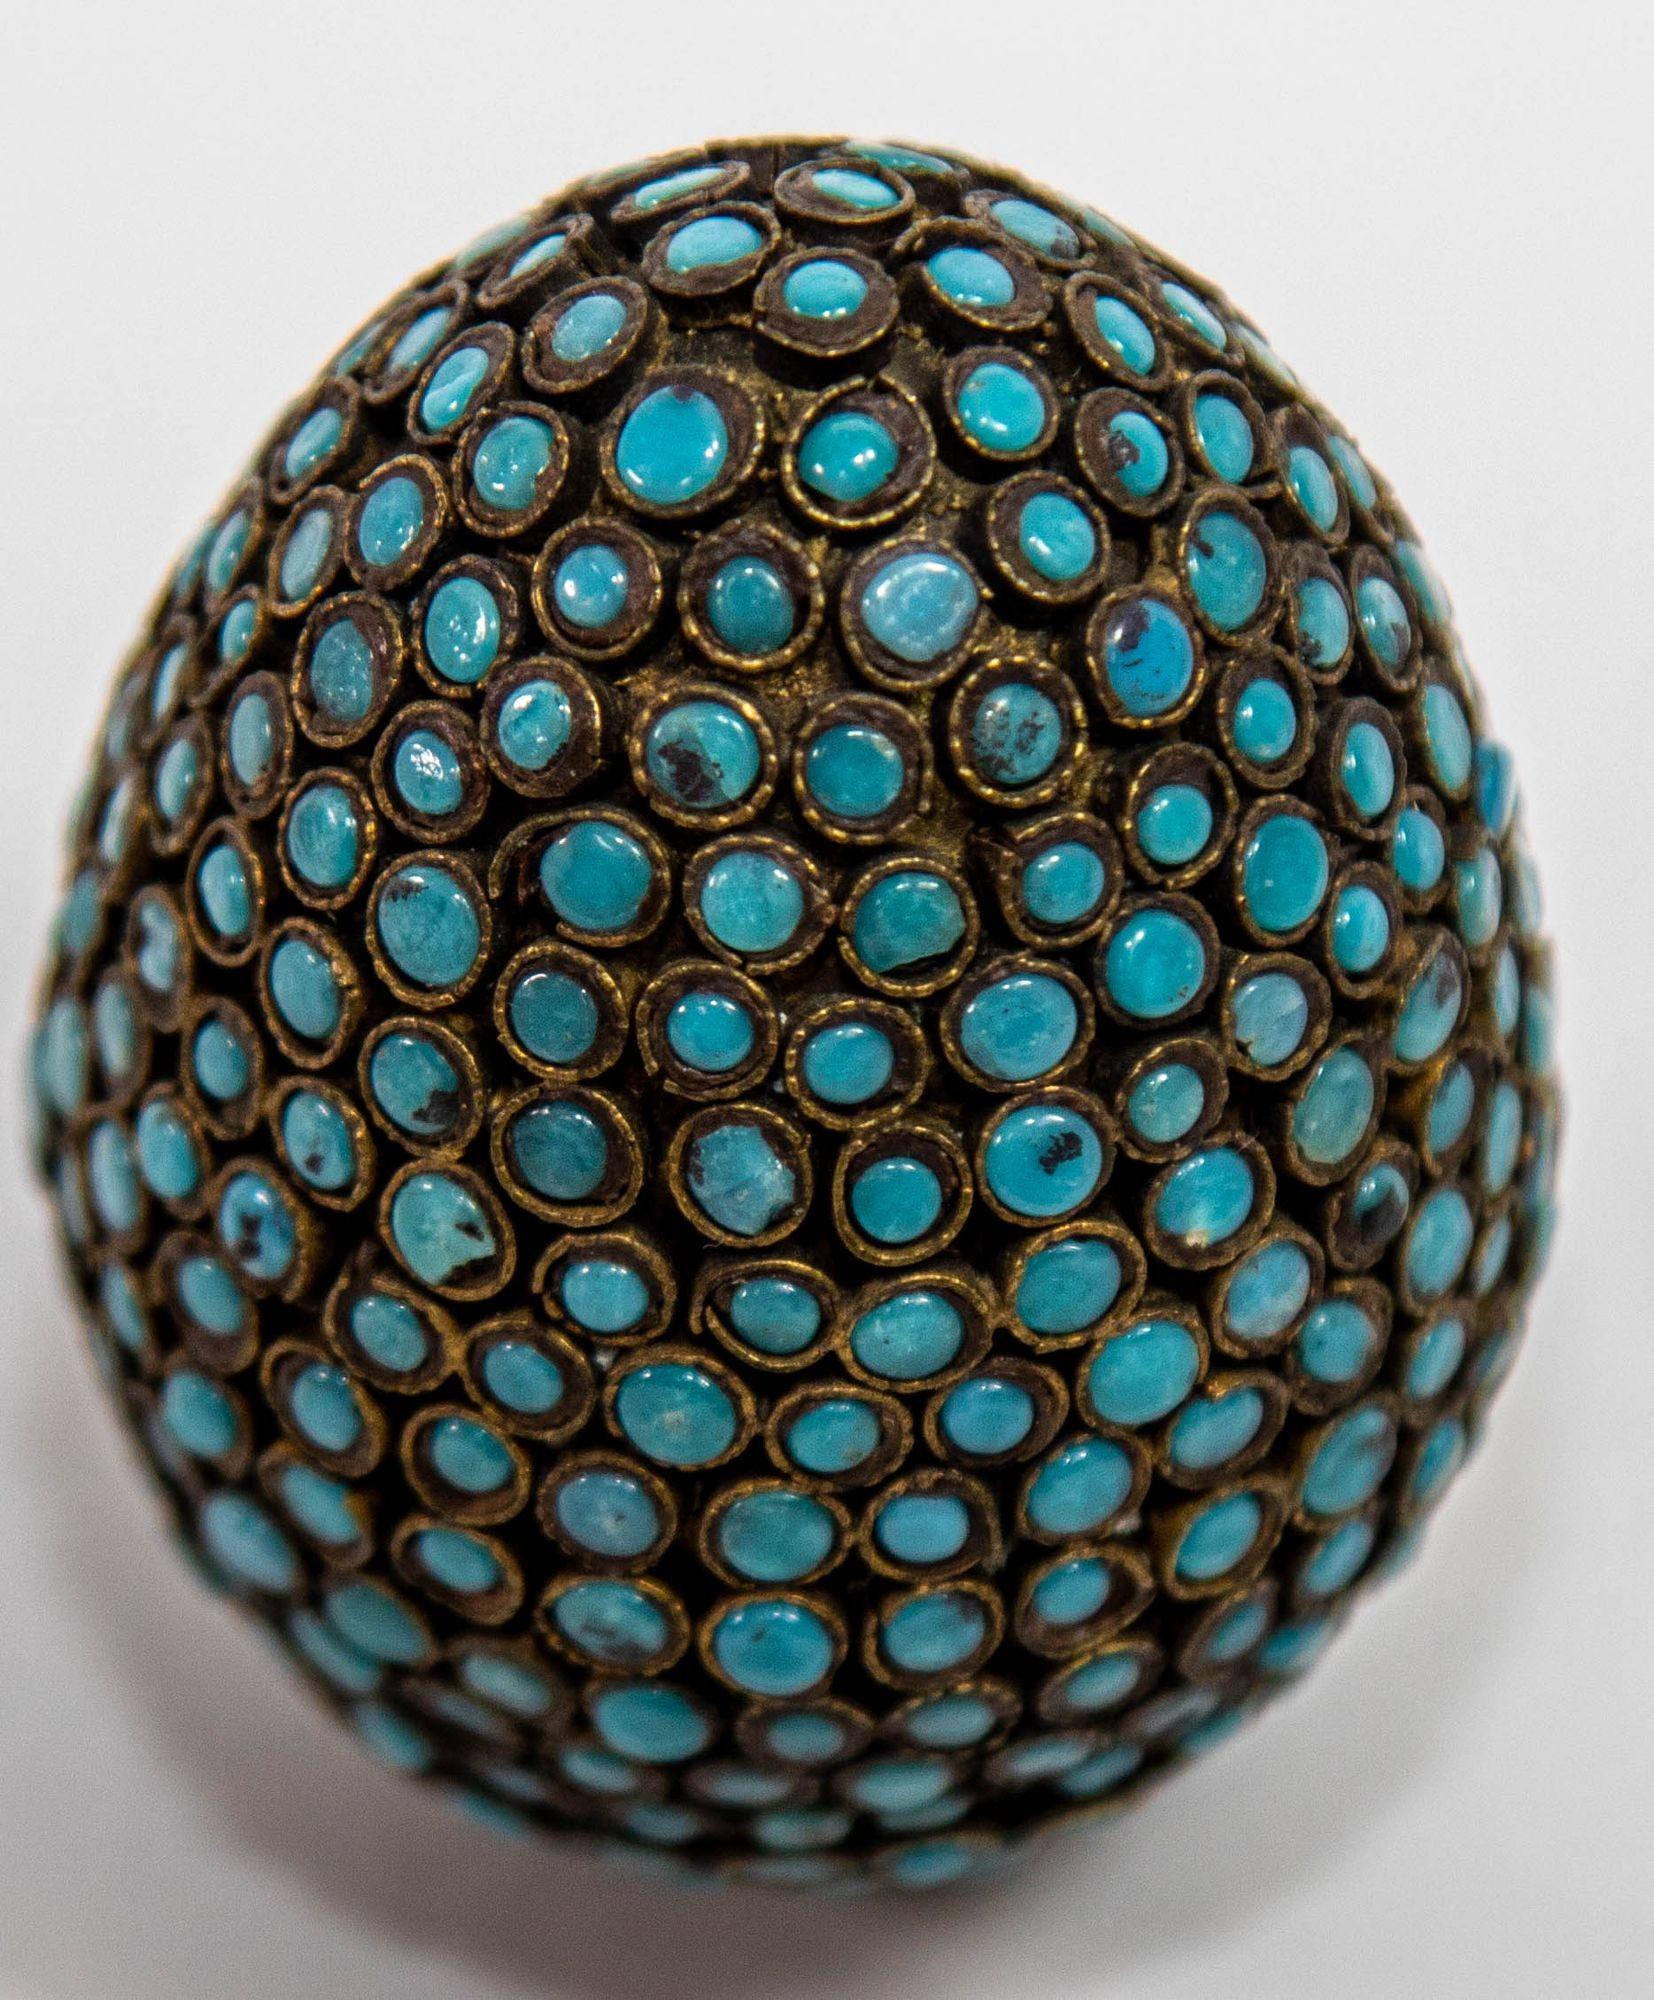 Antique Tibetan Egg Shaped Box with Turquoise Blue Stone Inlay For Sale 6